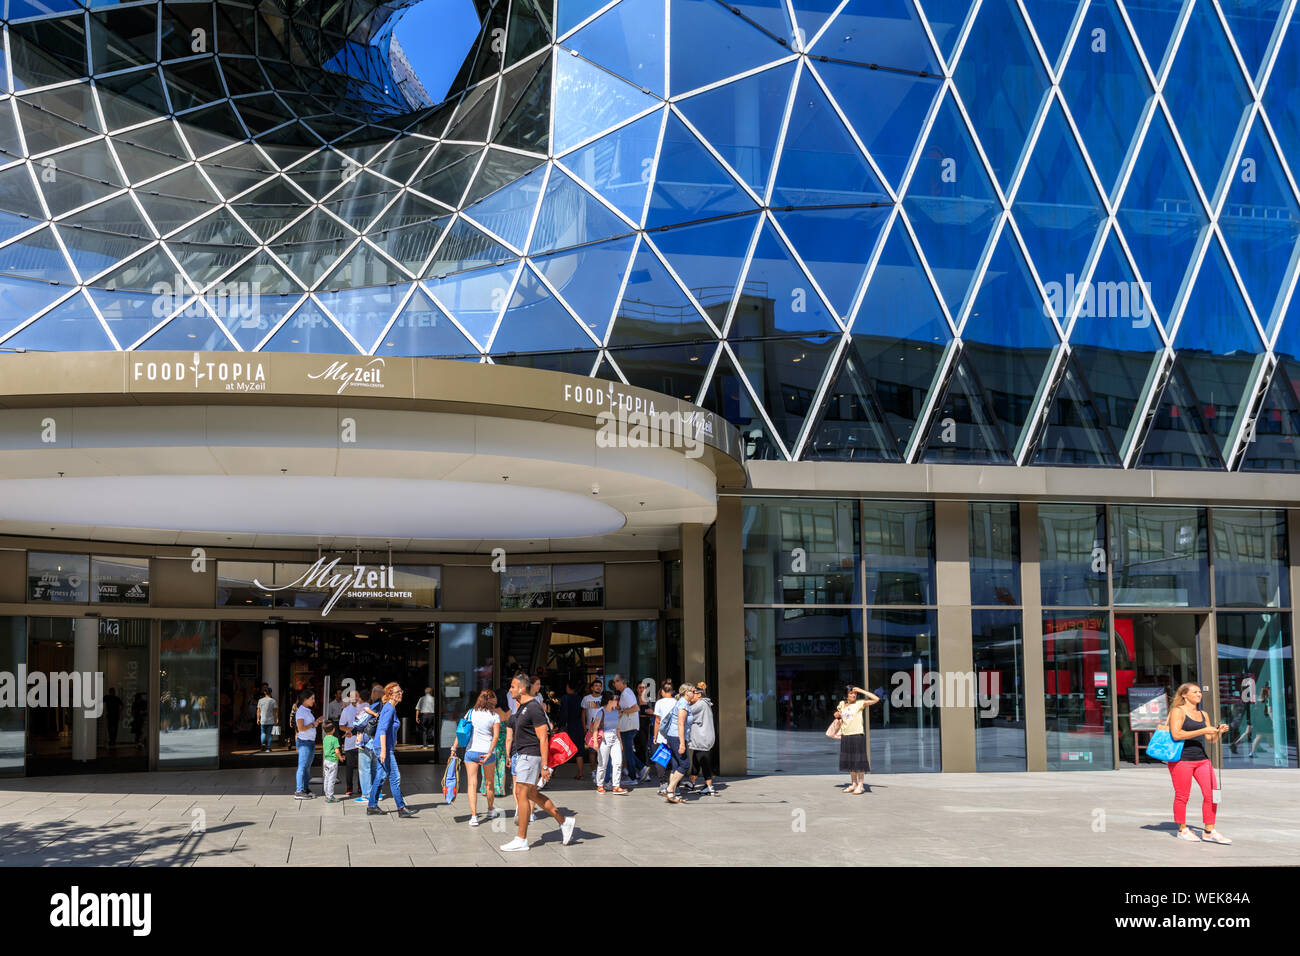 My Zeil shopping centre and mall, exterior facade and people shopping, Frankfurt am Main, Germany Stock Photo